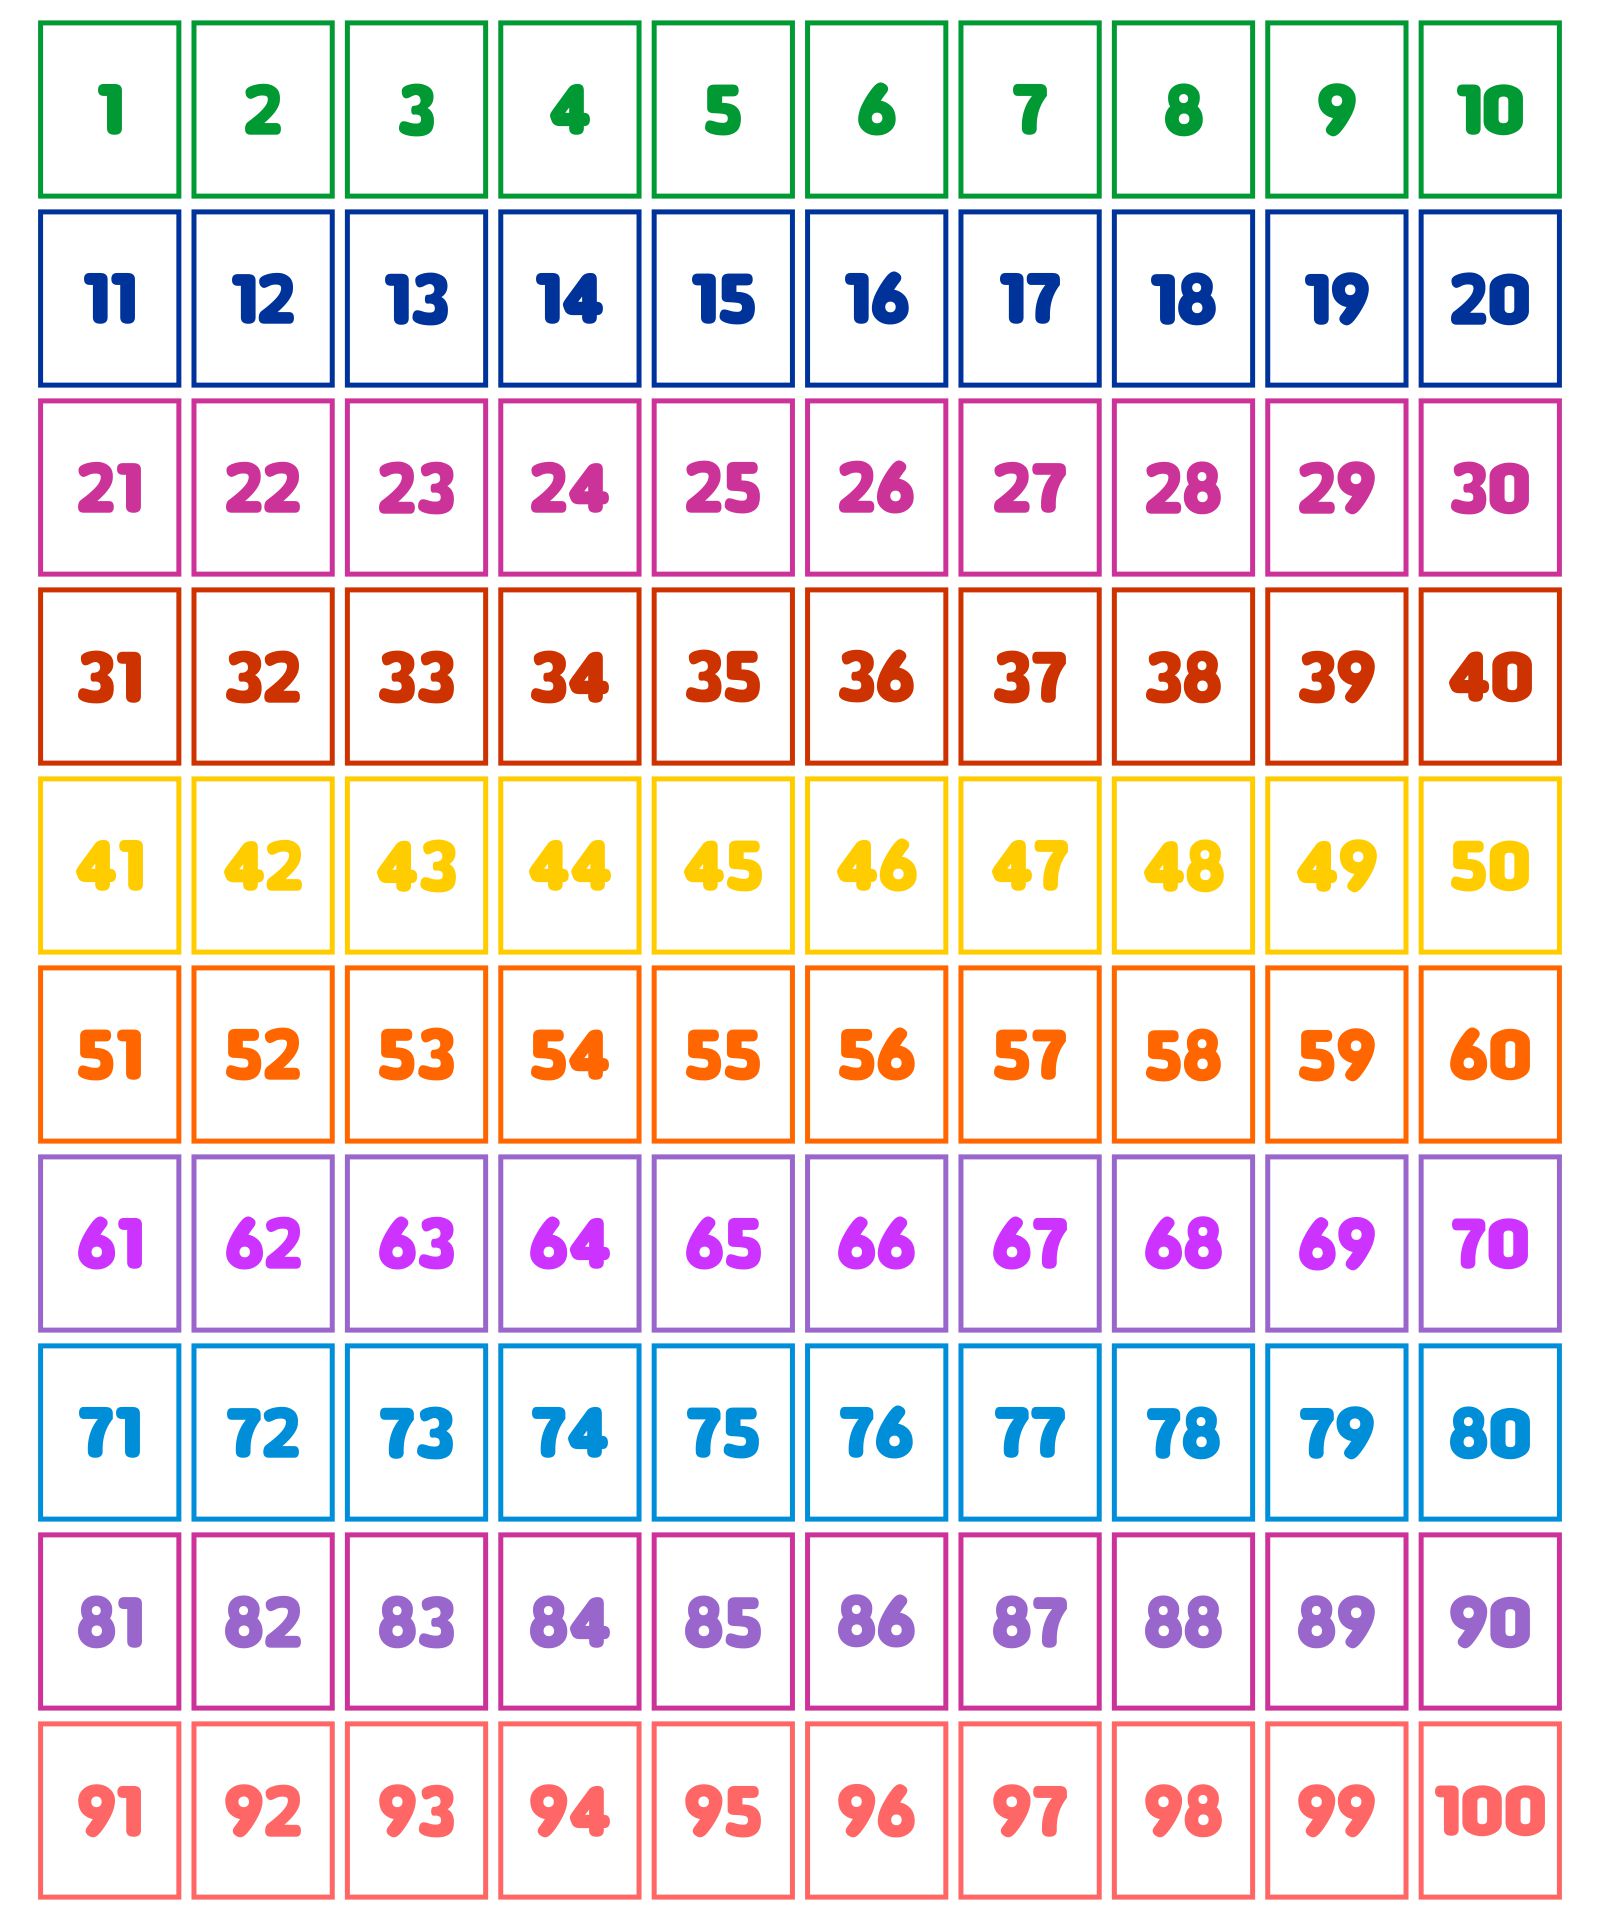 Free Printable Number Cards To 100